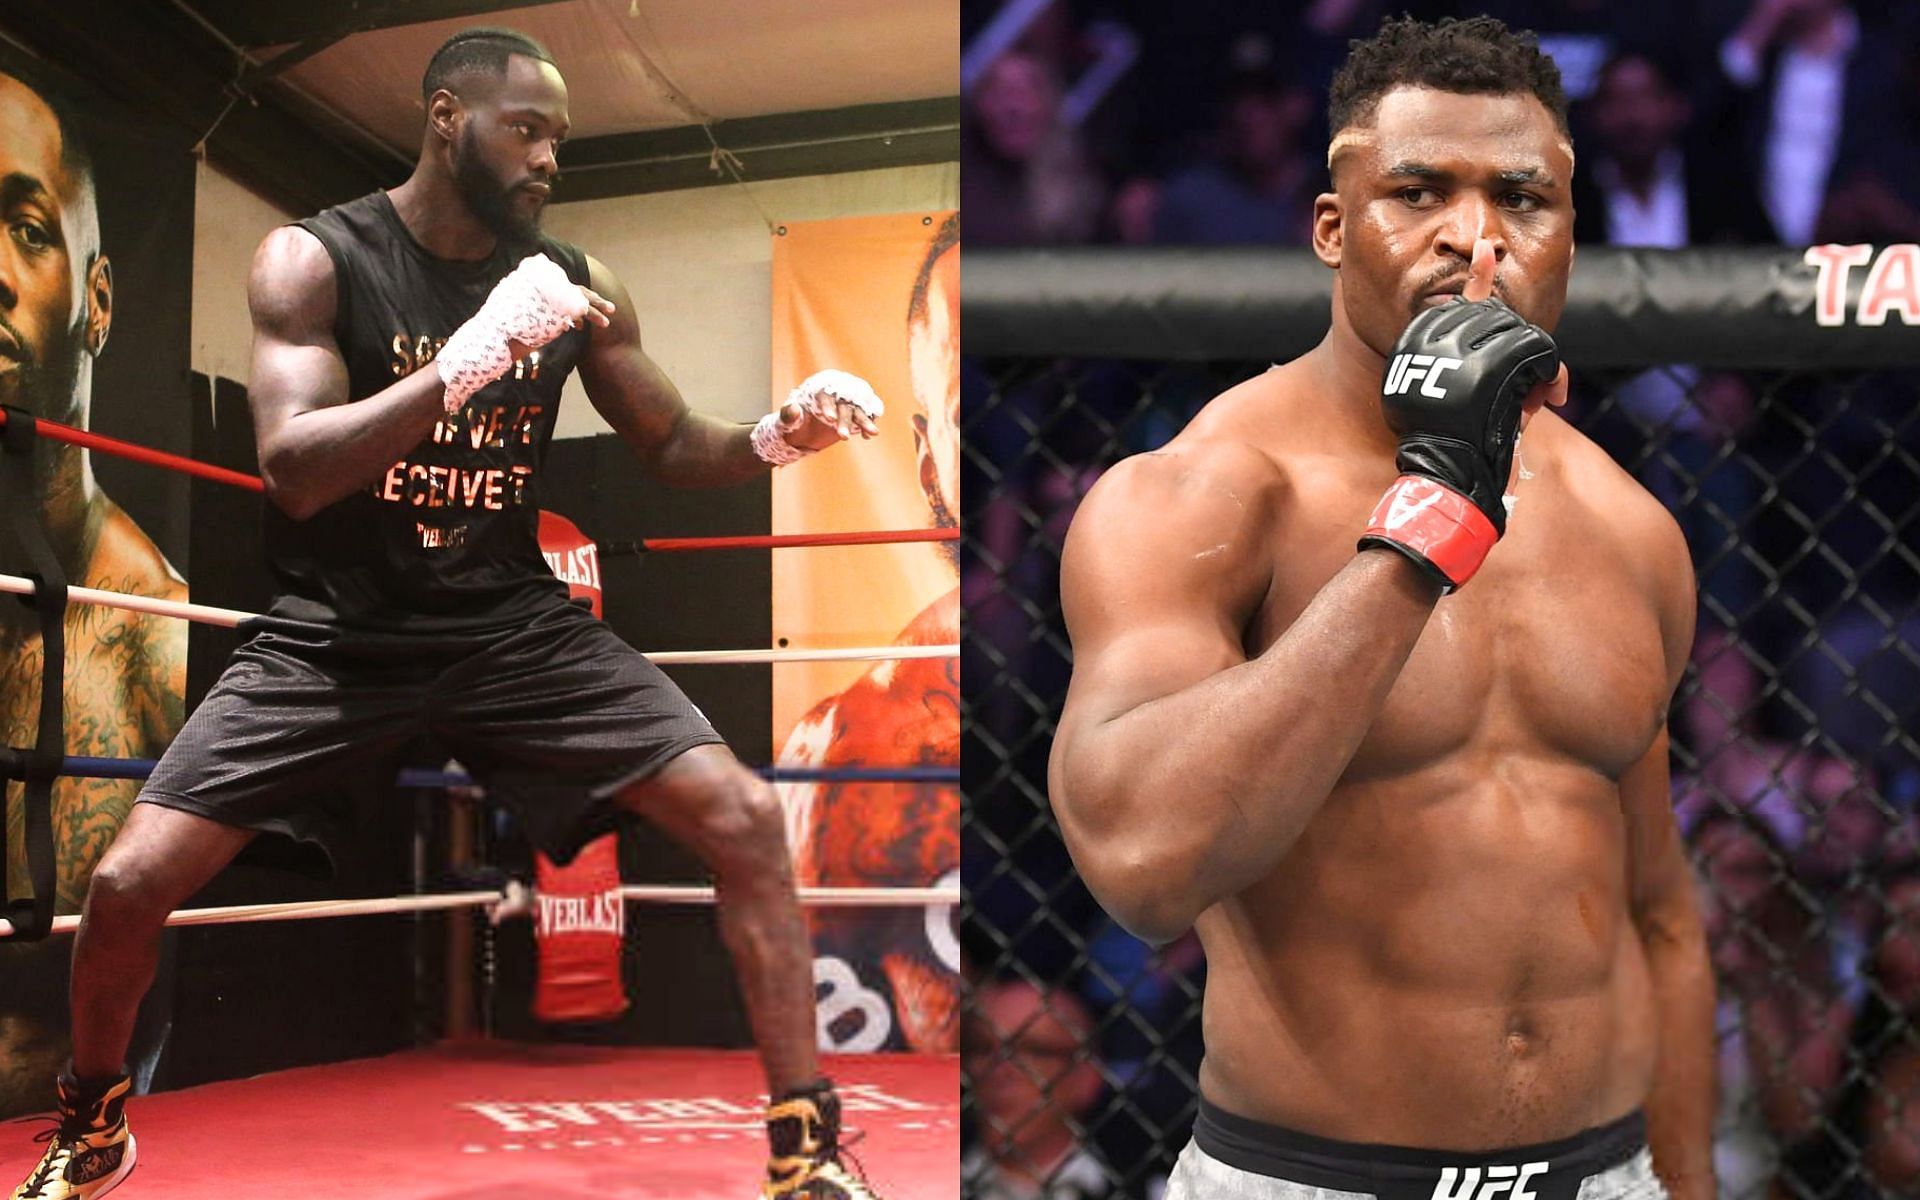 Deontay Wilder (left) and Francis Ngannou (right) [Images Courtesy: @GettyImages]